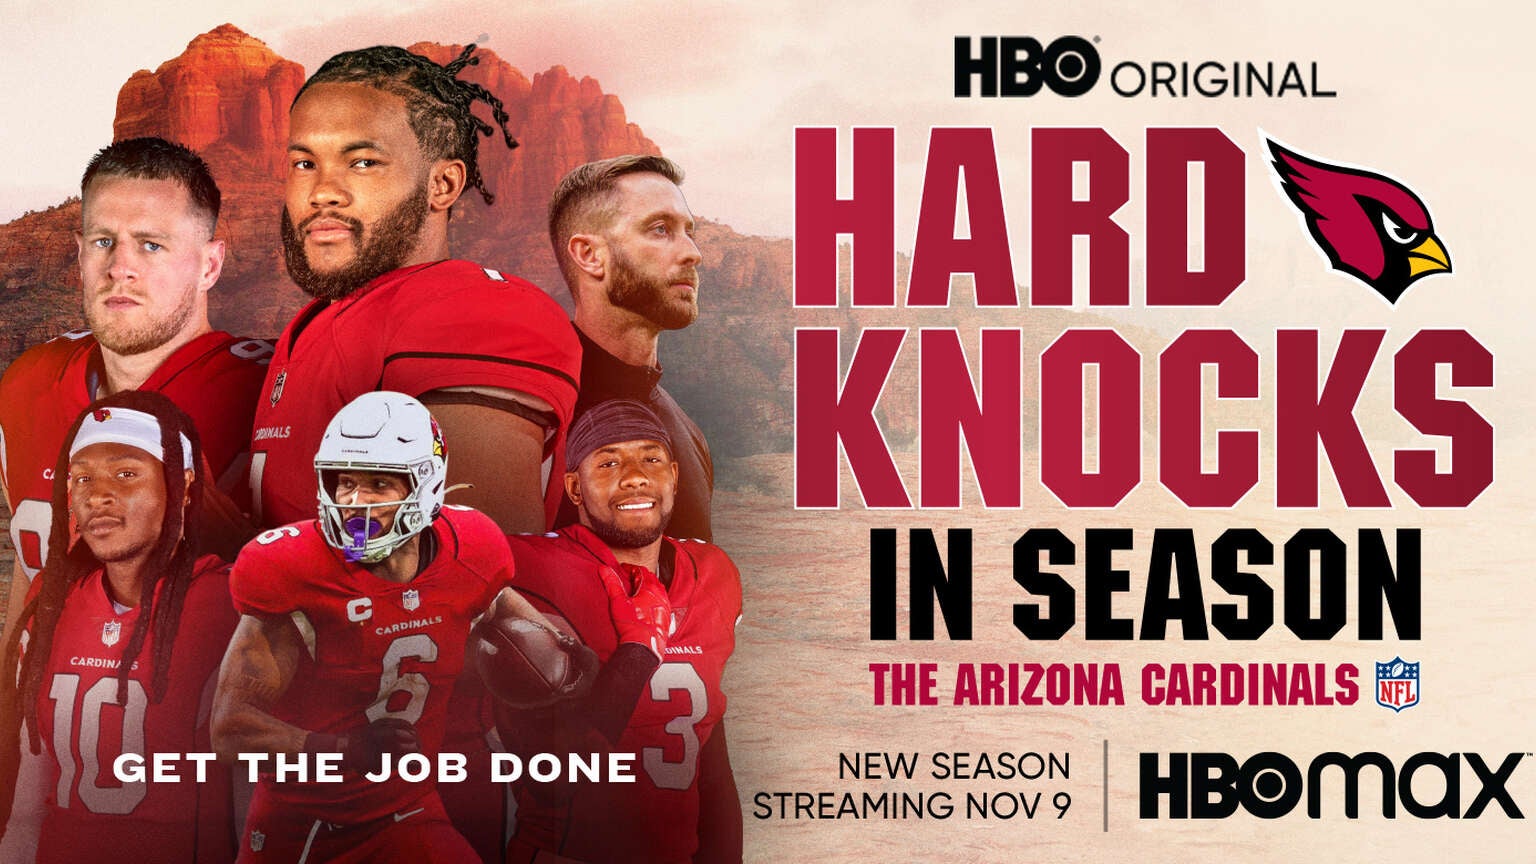 How to Watch 'Hard Knocks in Season The Arizona Cardinals' For Free on